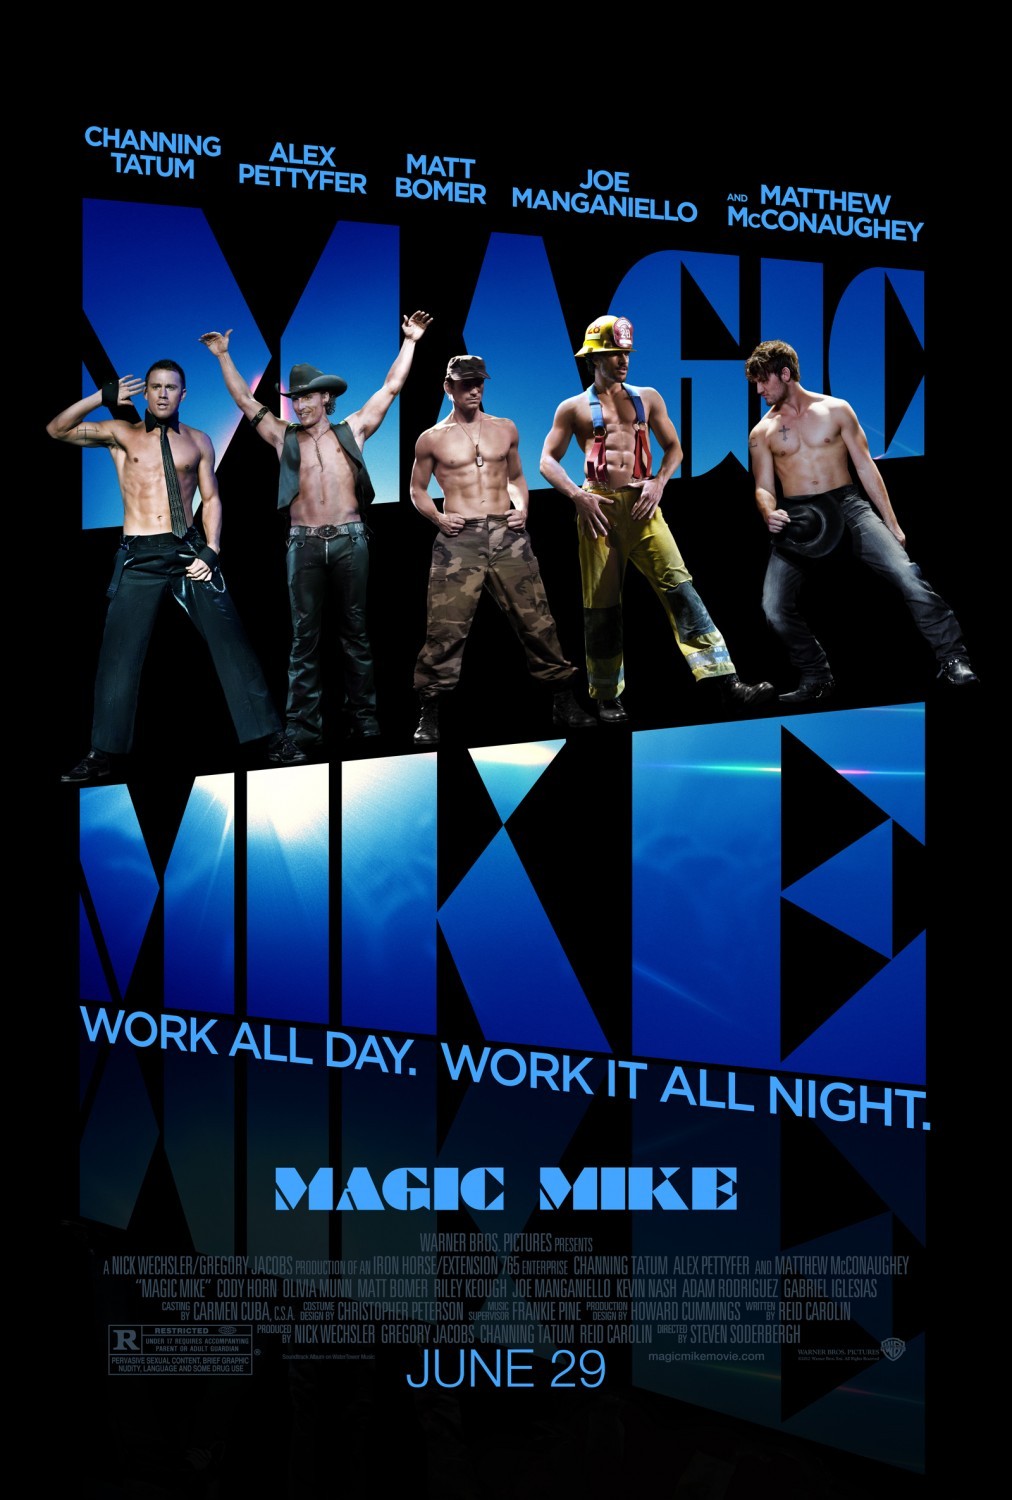 Mike Lane works as a stripper in a club in Tampa. One day, when Mike randomly meets Adam, a jobless man, he decides to help him and introduces him to his boss.